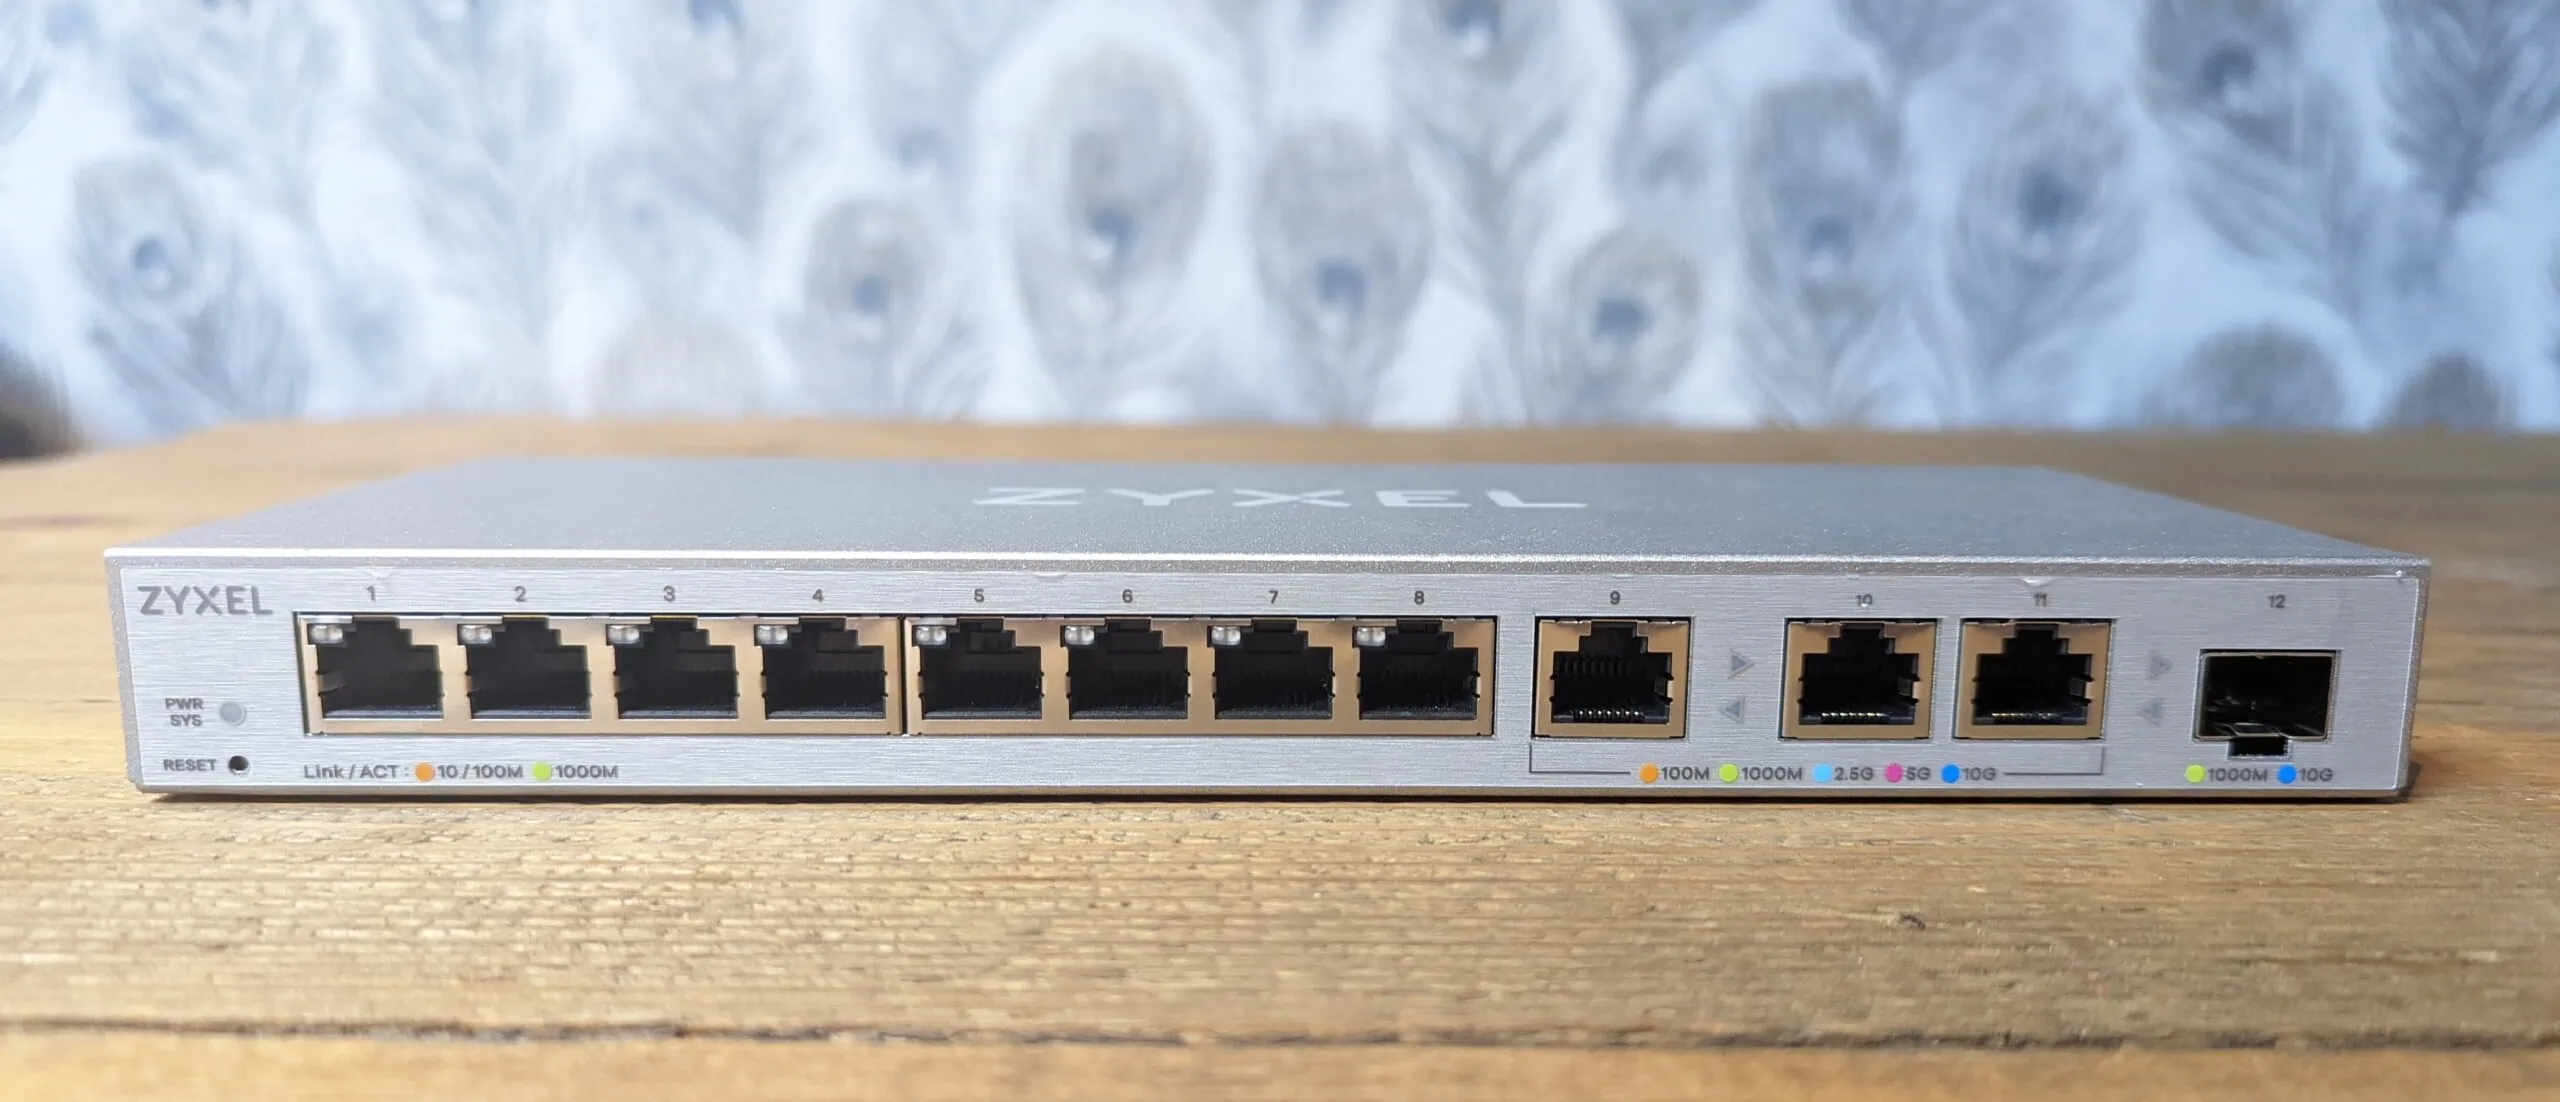 Zyxel XGS1250-12 Multi-Gigabit Switch Review – Semi-affordable 3-Port 10Gbps